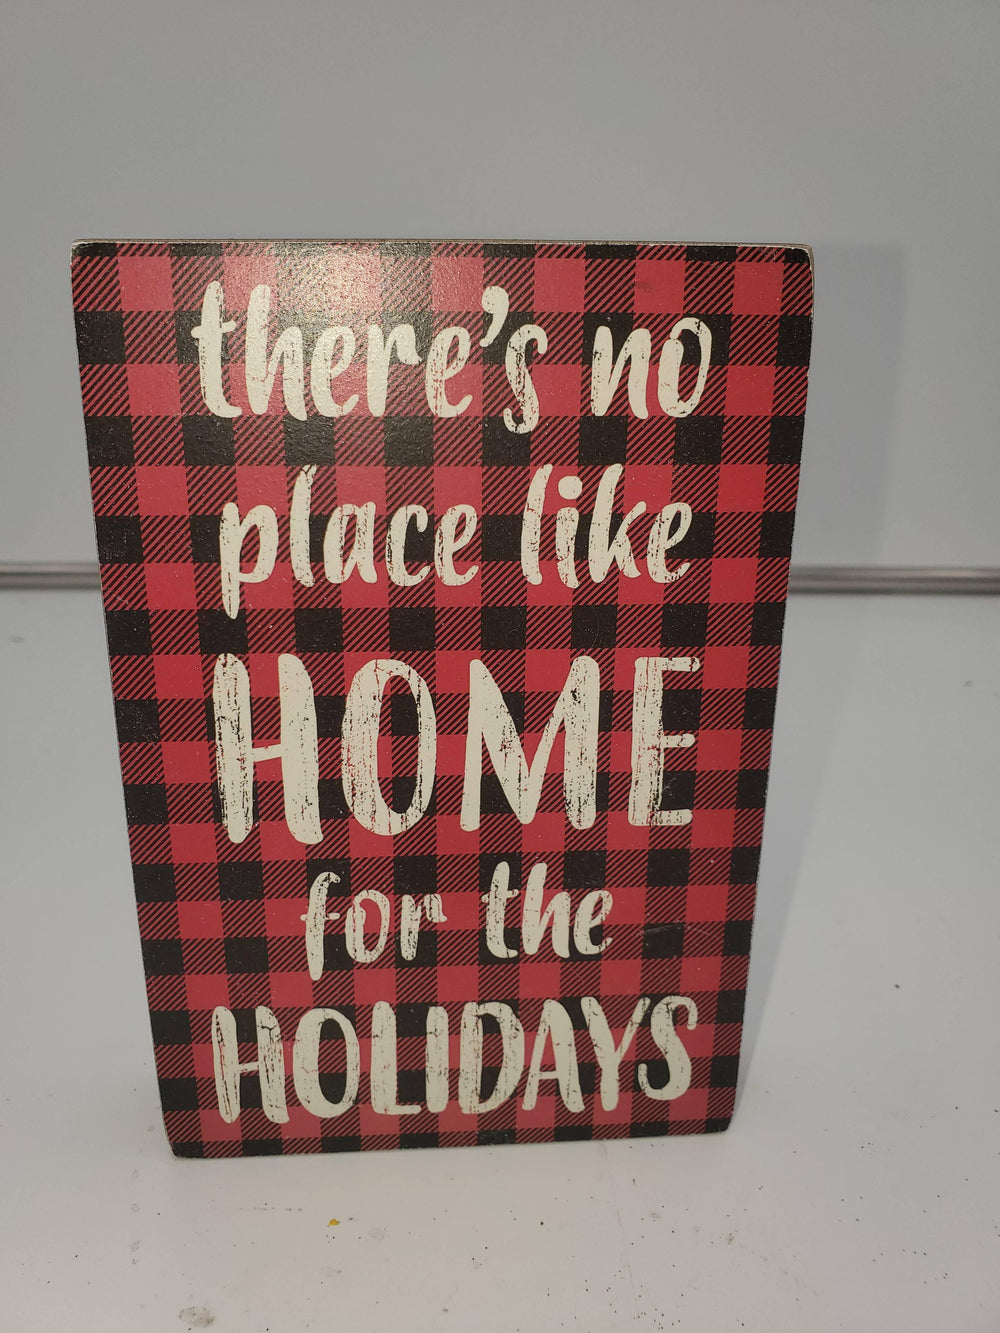 No place like home - Village Floral Designs and Gifts